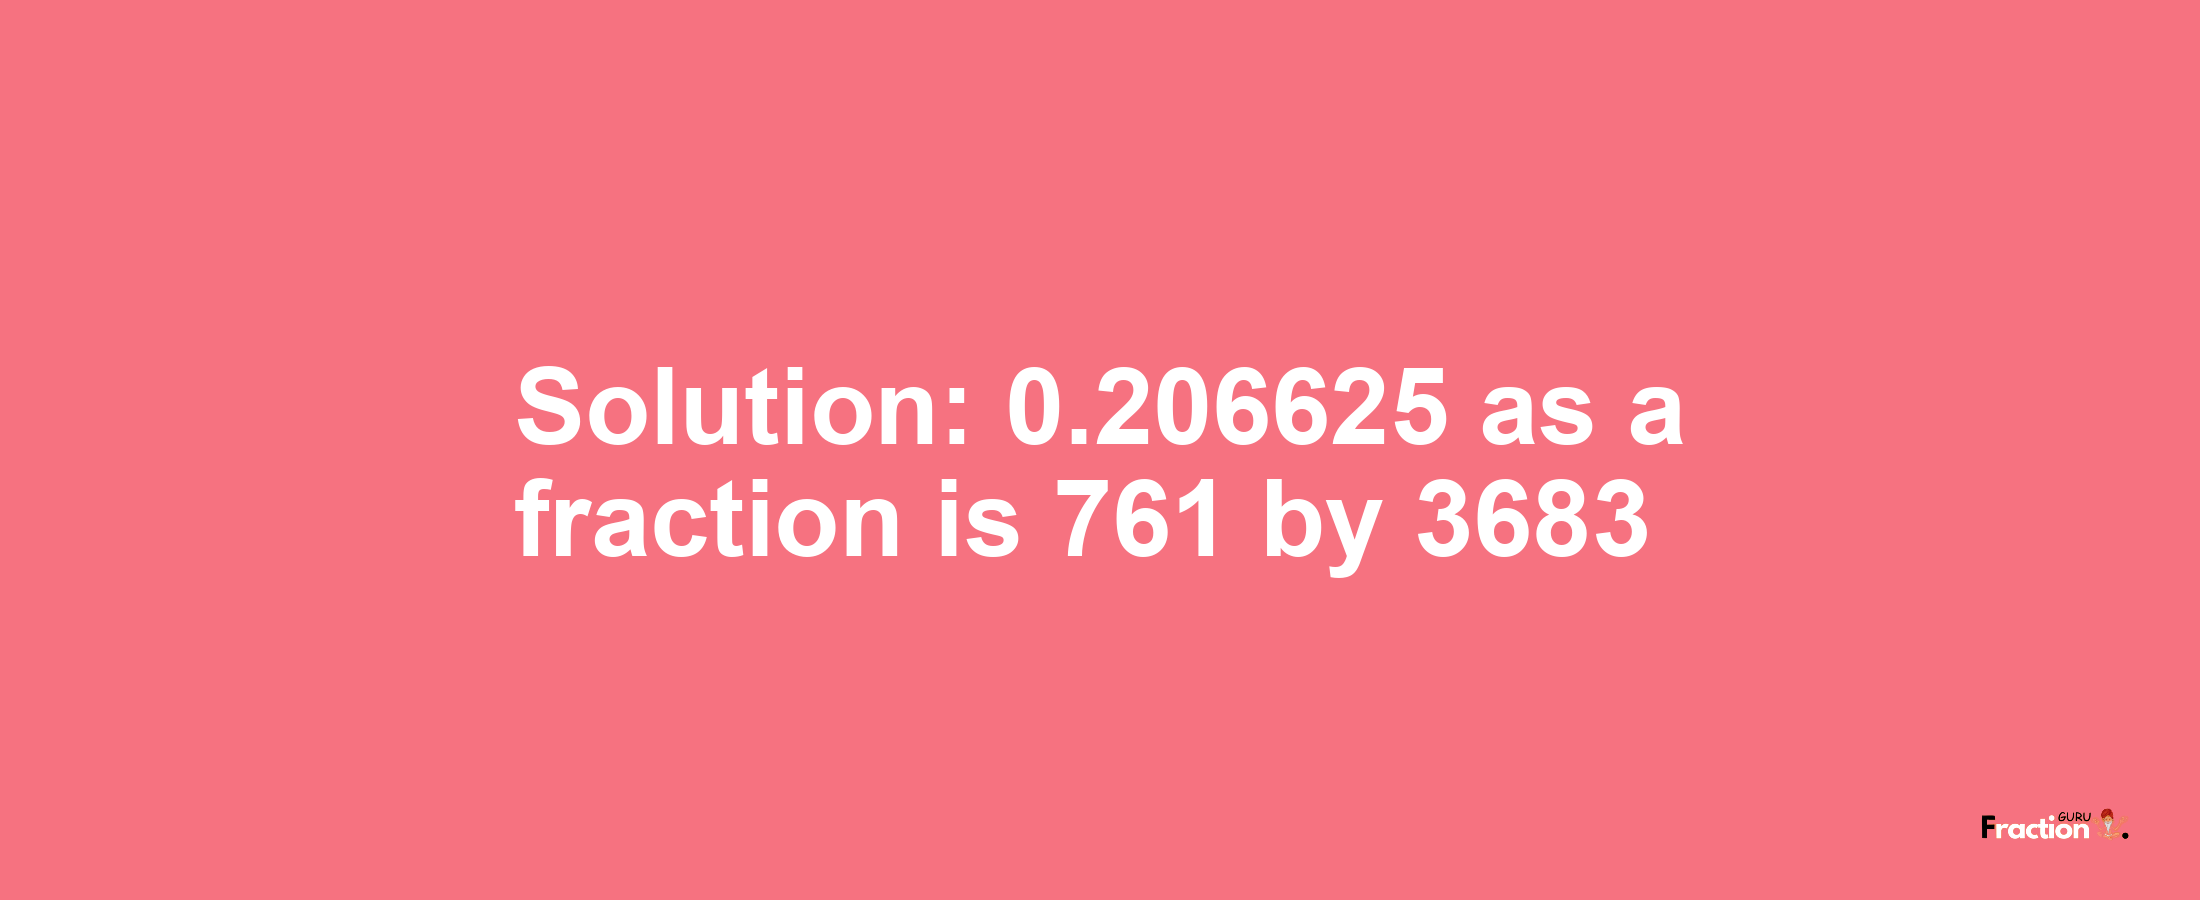 Solution:0.206625 as a fraction is 761/3683